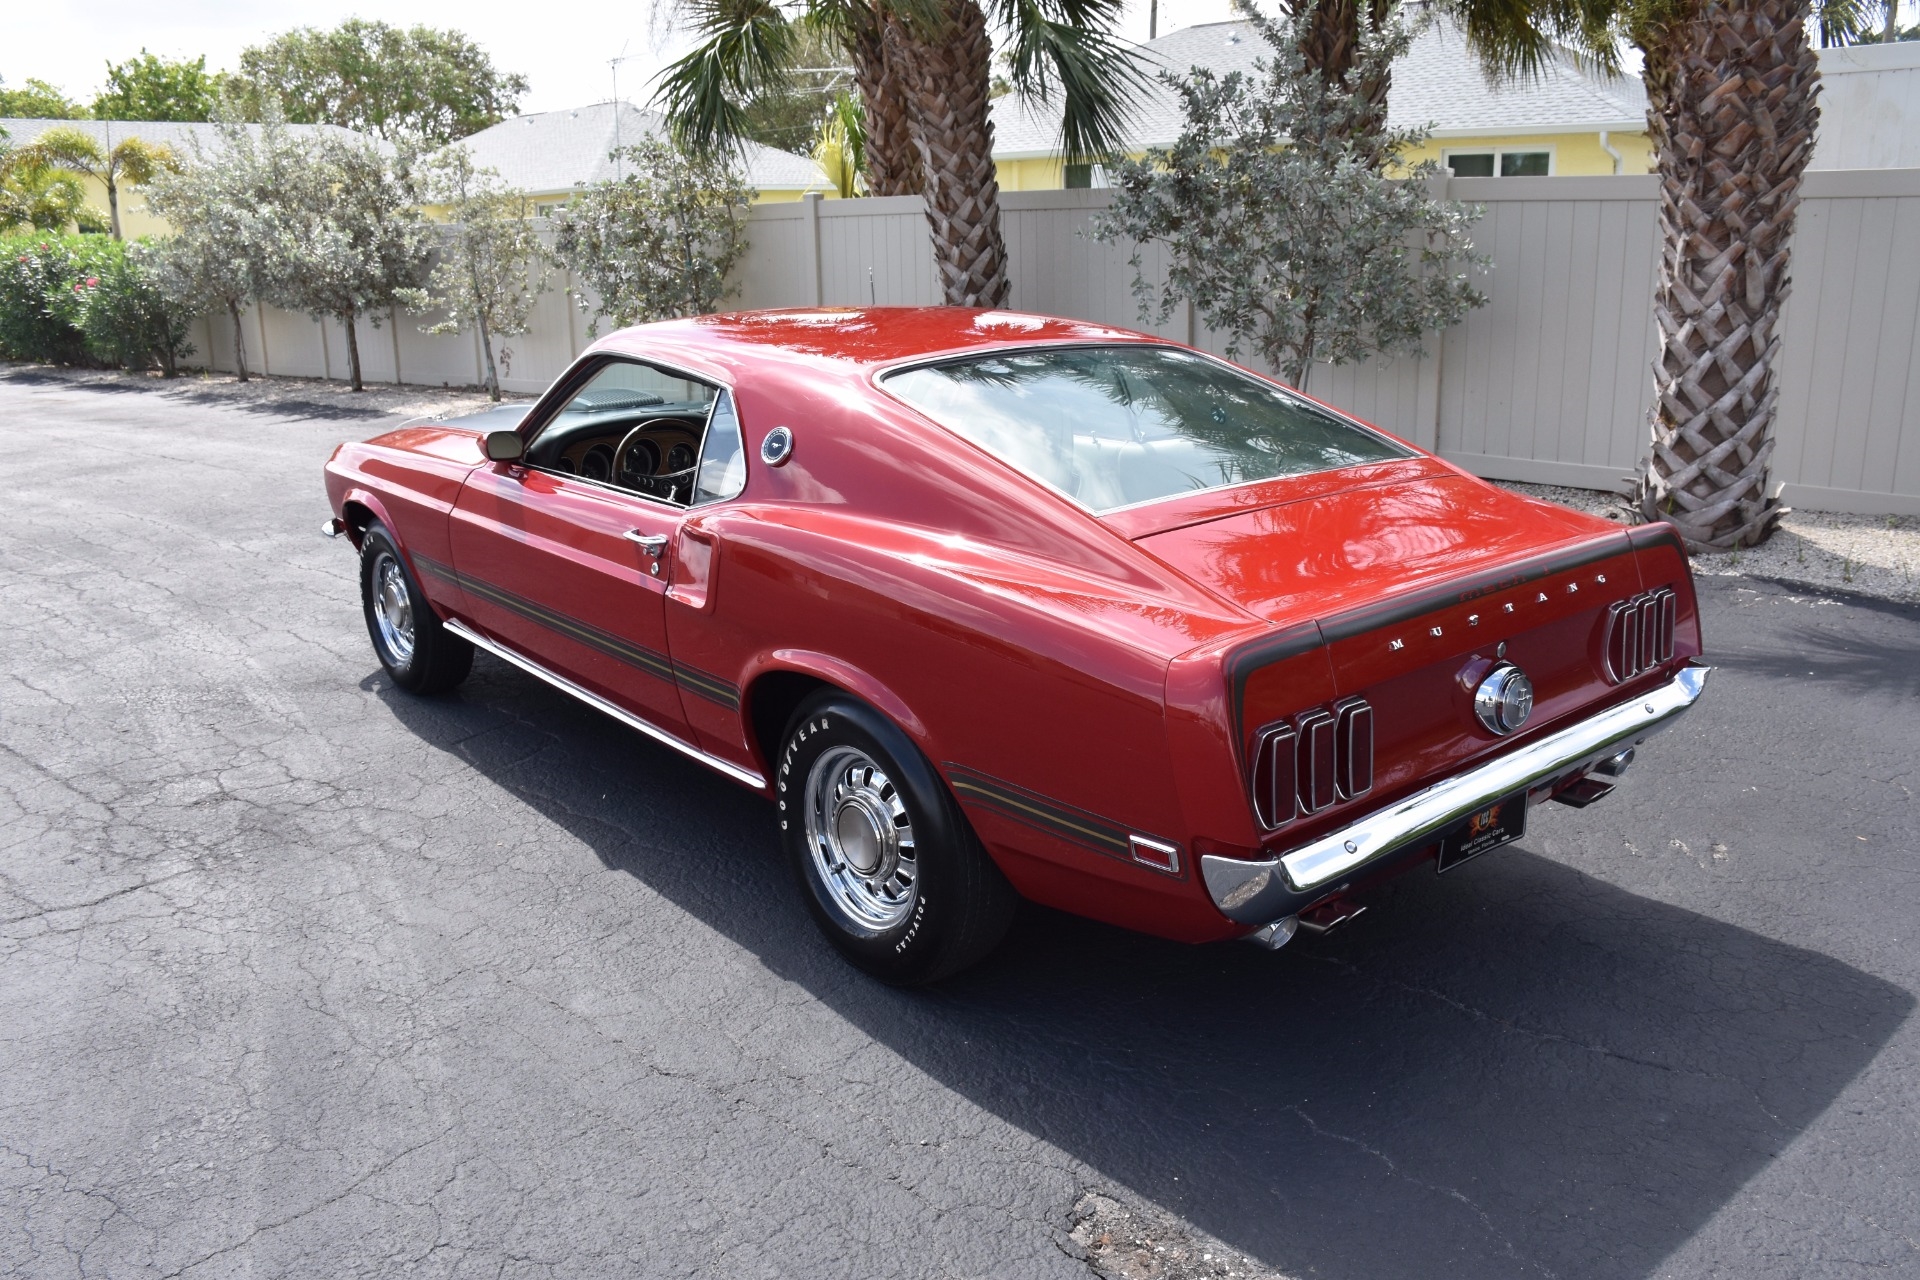 1969 Ford Mustang Mach 1 - 428 Cobra Jet 0 Candy Apple Red Coupe 428C.I ...